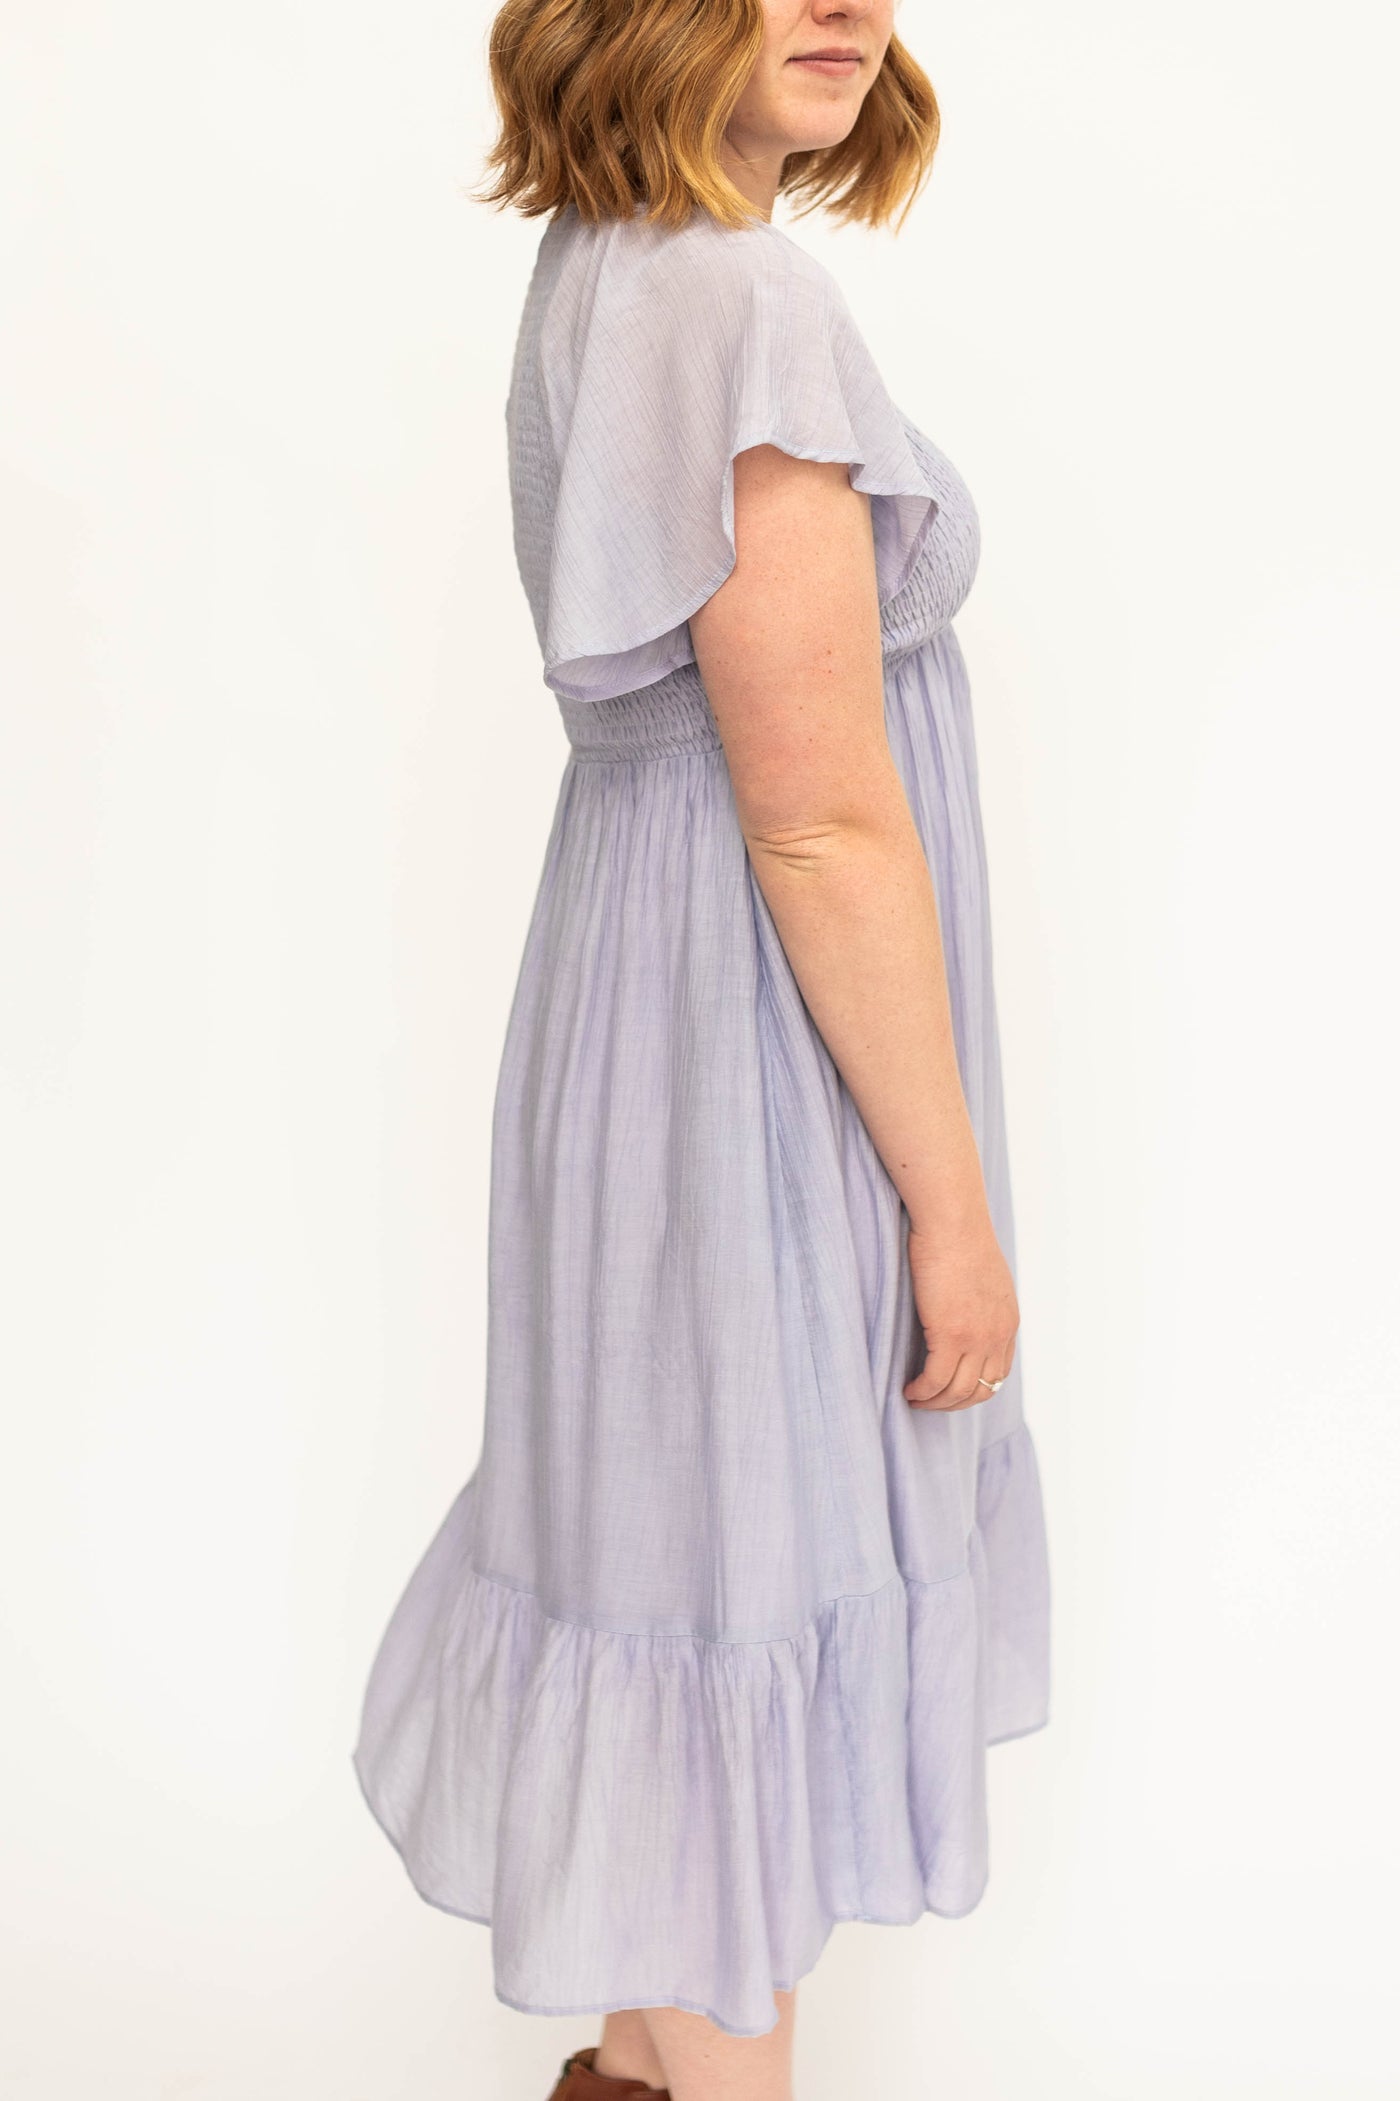 Side view of a short sleeve Lavender satin dress with a V-neck and smocked bodice.